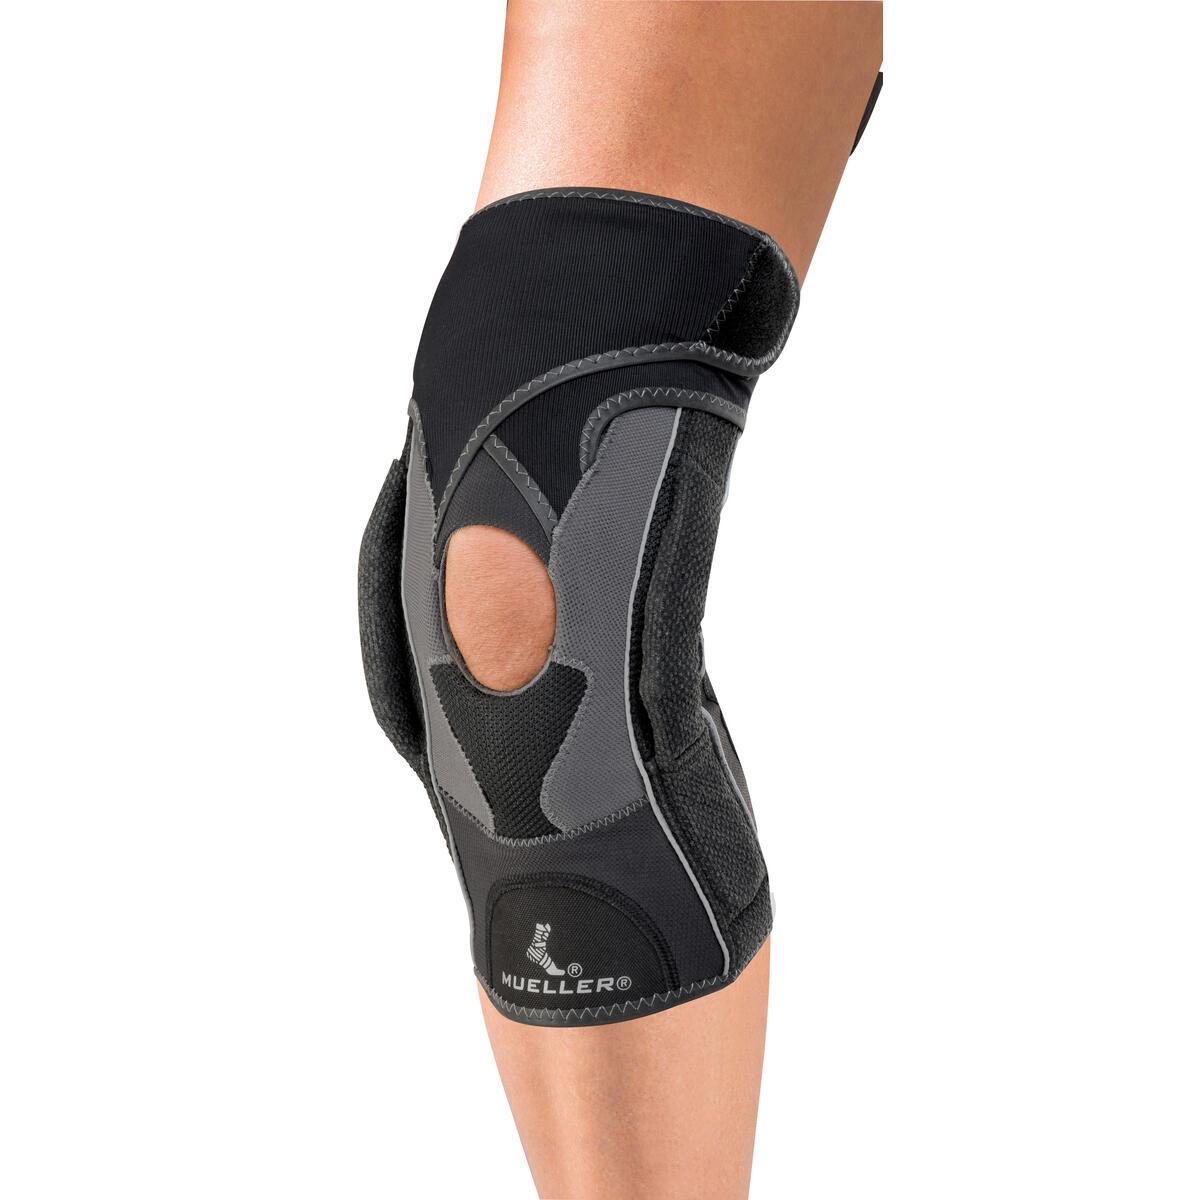 Mueller HG80 Hinged Knee Brace Compression Support for Injury (L) 2/2